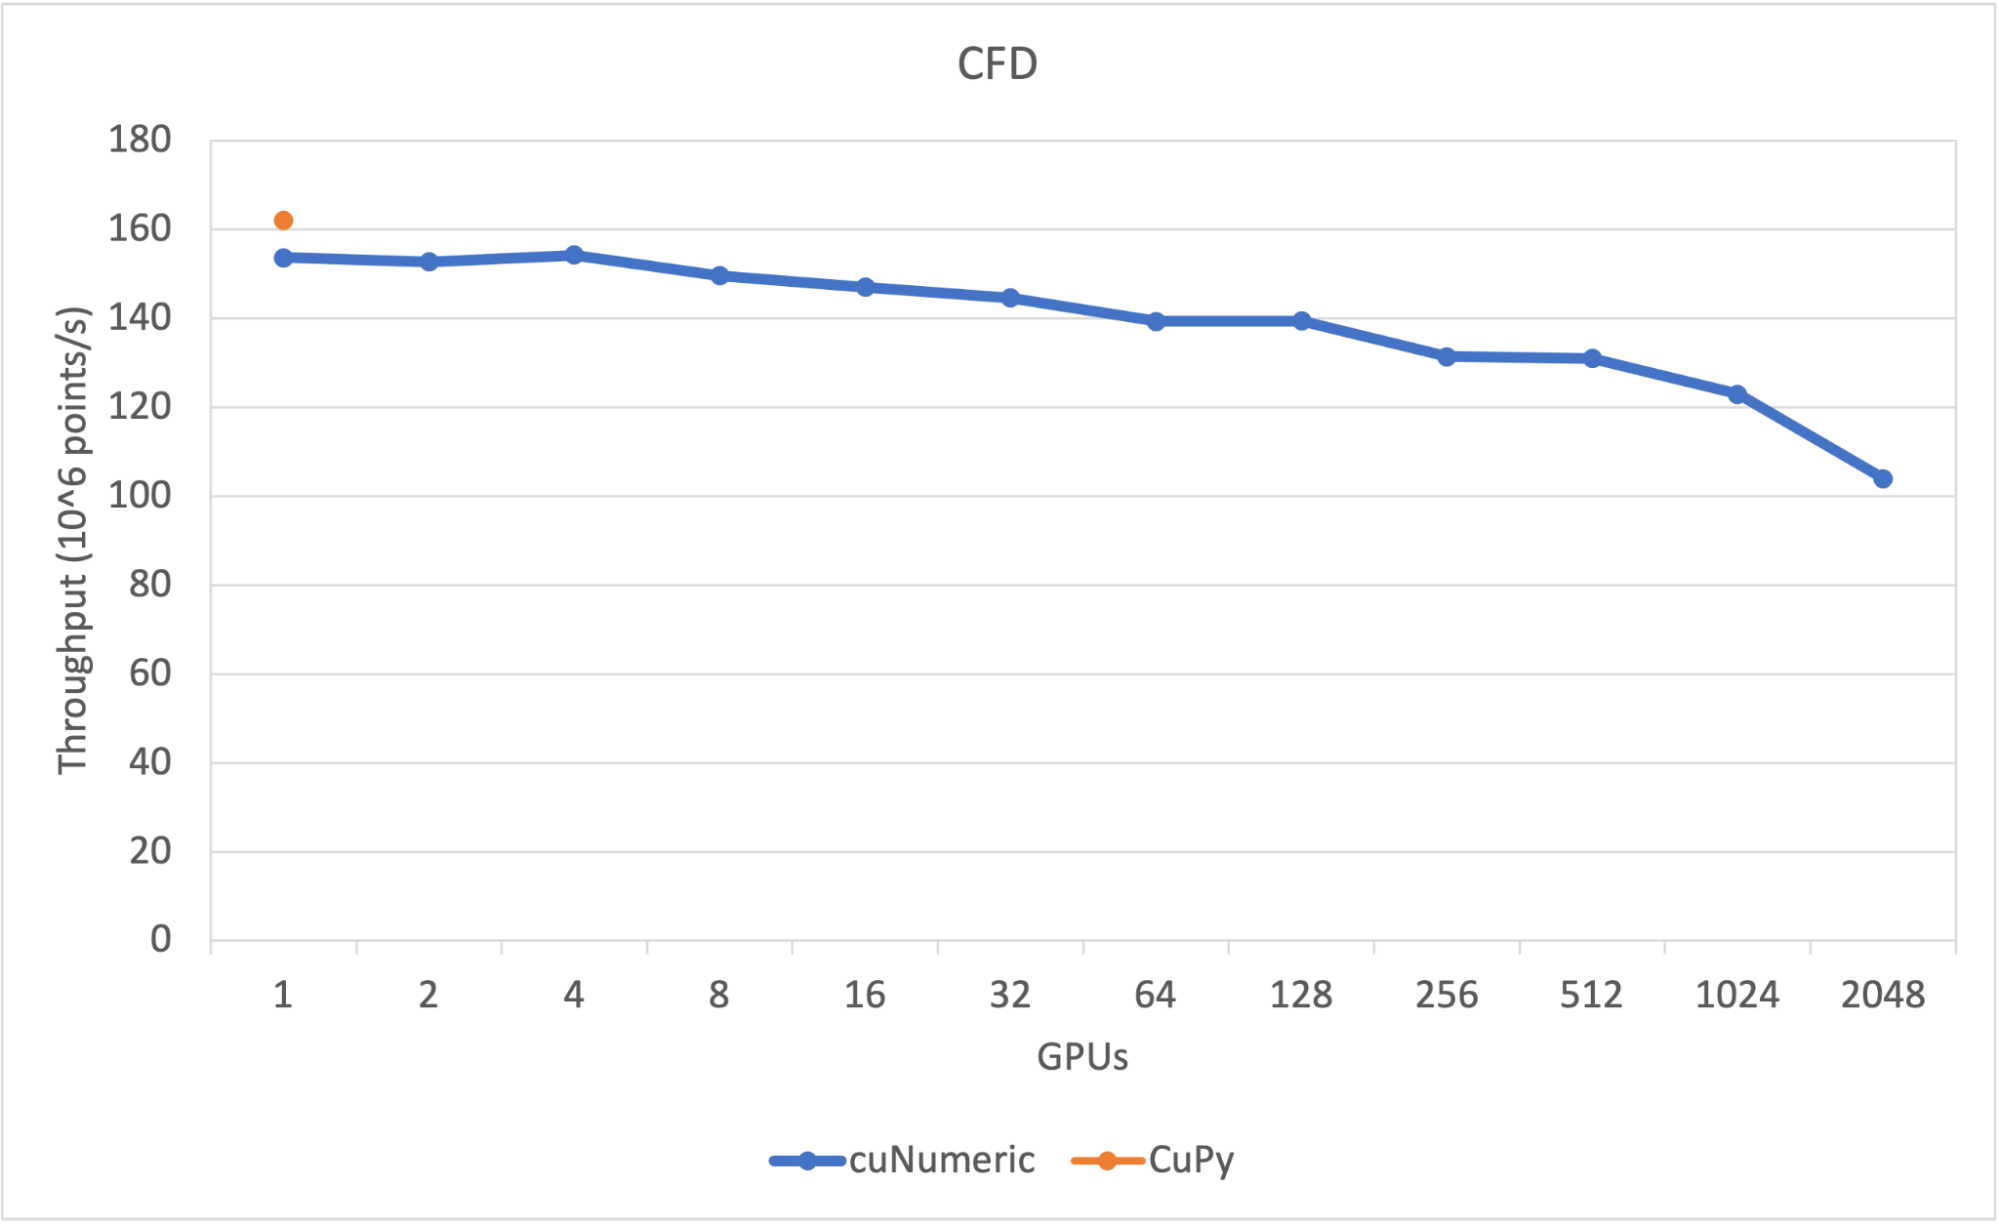 A graph showing weak scaling results for the CFD code example in a graphical representation. The X axis represents the number of GPUs from 1 to 2048, the Y axis represents computational throughput. On the top of the graph there is an orange dot at 162 million points per second representing a throughput for CuPy on a single GPU. There is a blue line going from 1 to 2048 GPUs for cuNumeric code with the throughput changing from 153 for the single GPU to 104 when executed on 2048 GPUs.